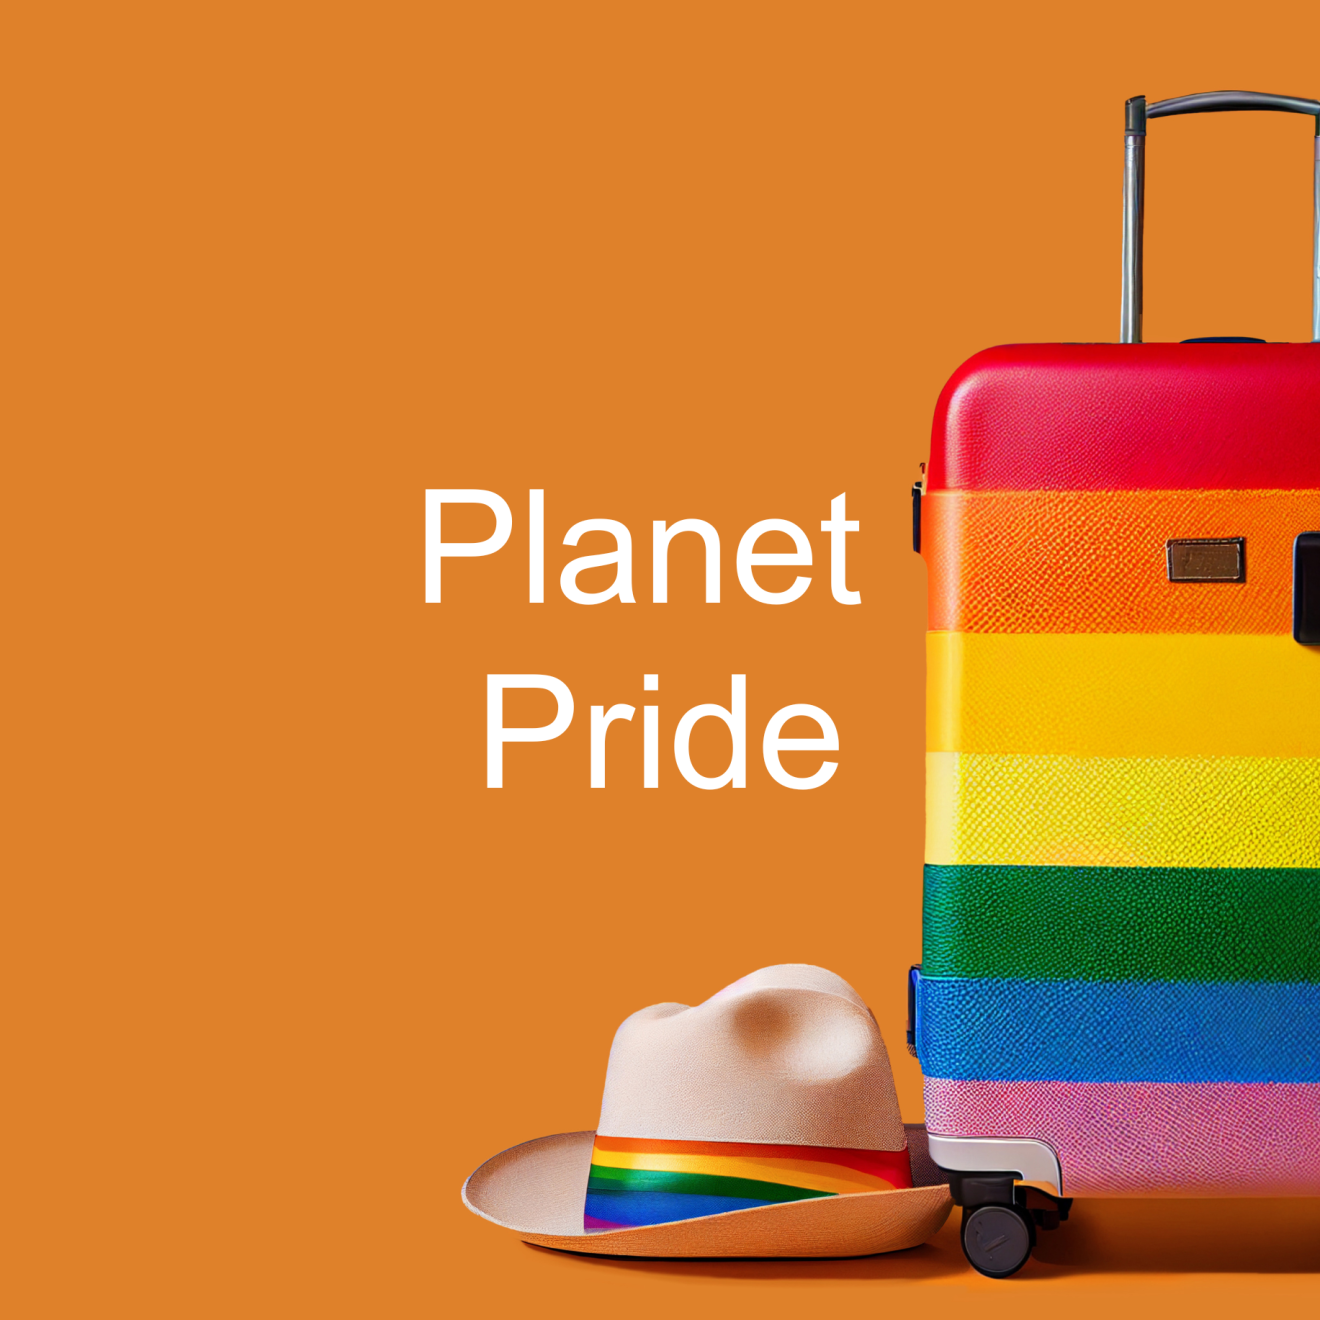 UTS Planet Pride with rainbow hat and suitcase with orange background